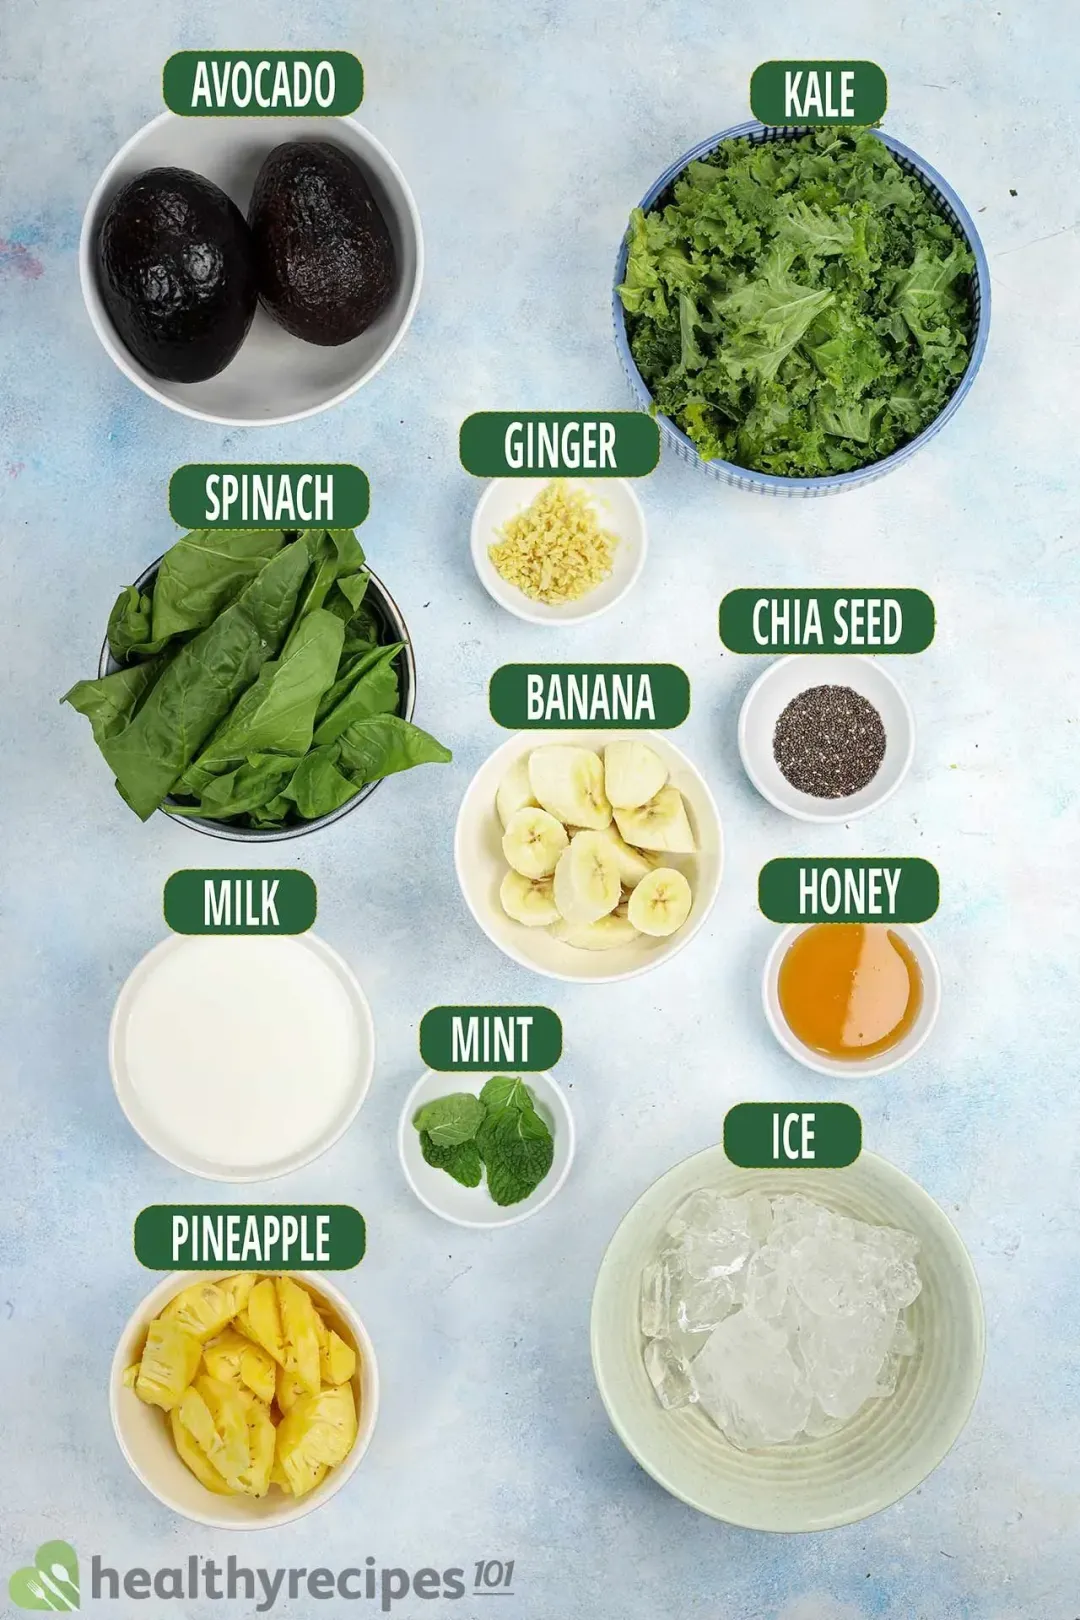 ingredients for this avocado green smoothie: avocados, kale, minced ginger, sliced bananas, pineapples, spinach, milk, ice, honey, and chia seeds